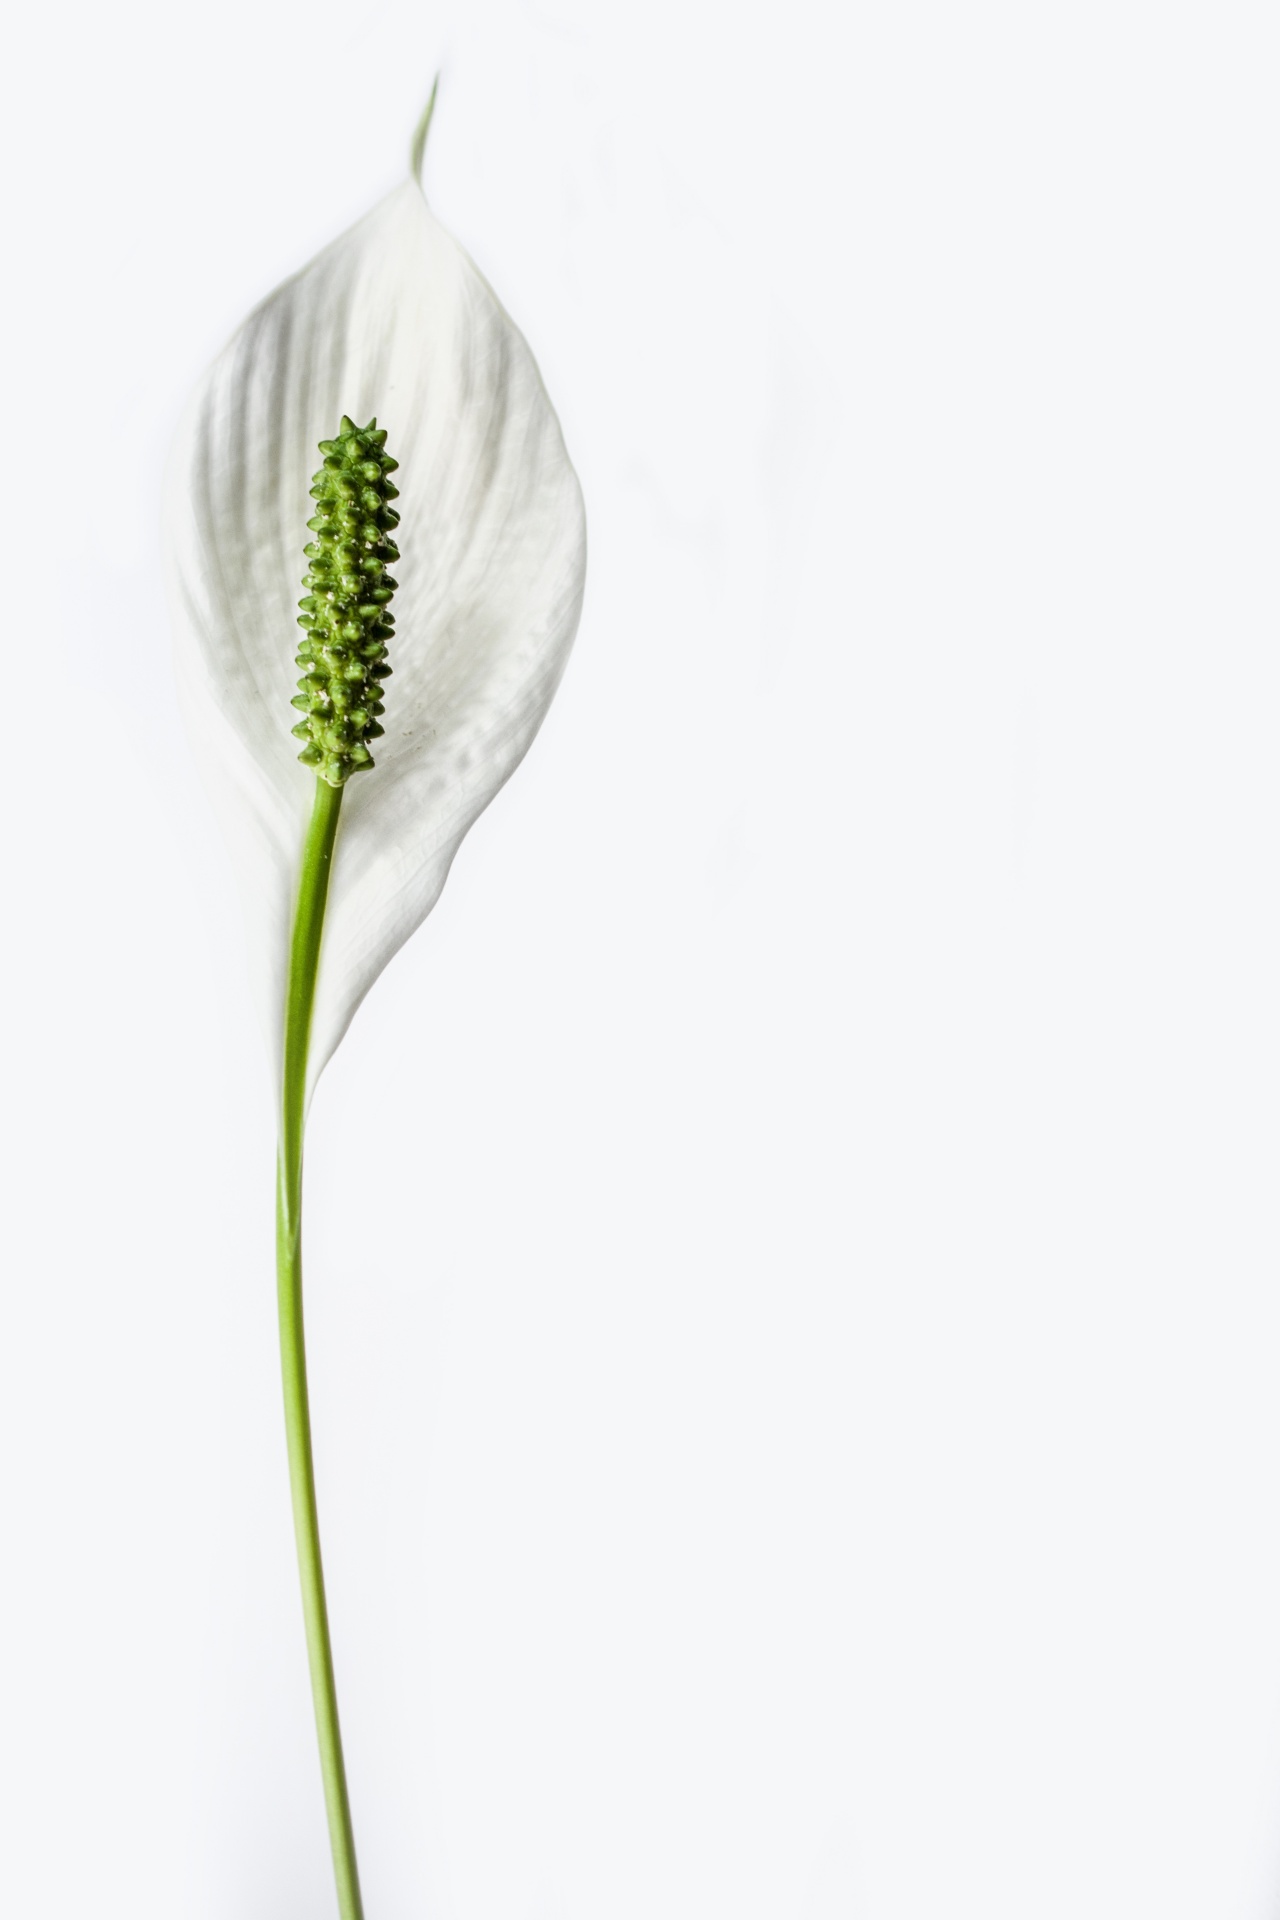 peace lily flower plant free photo